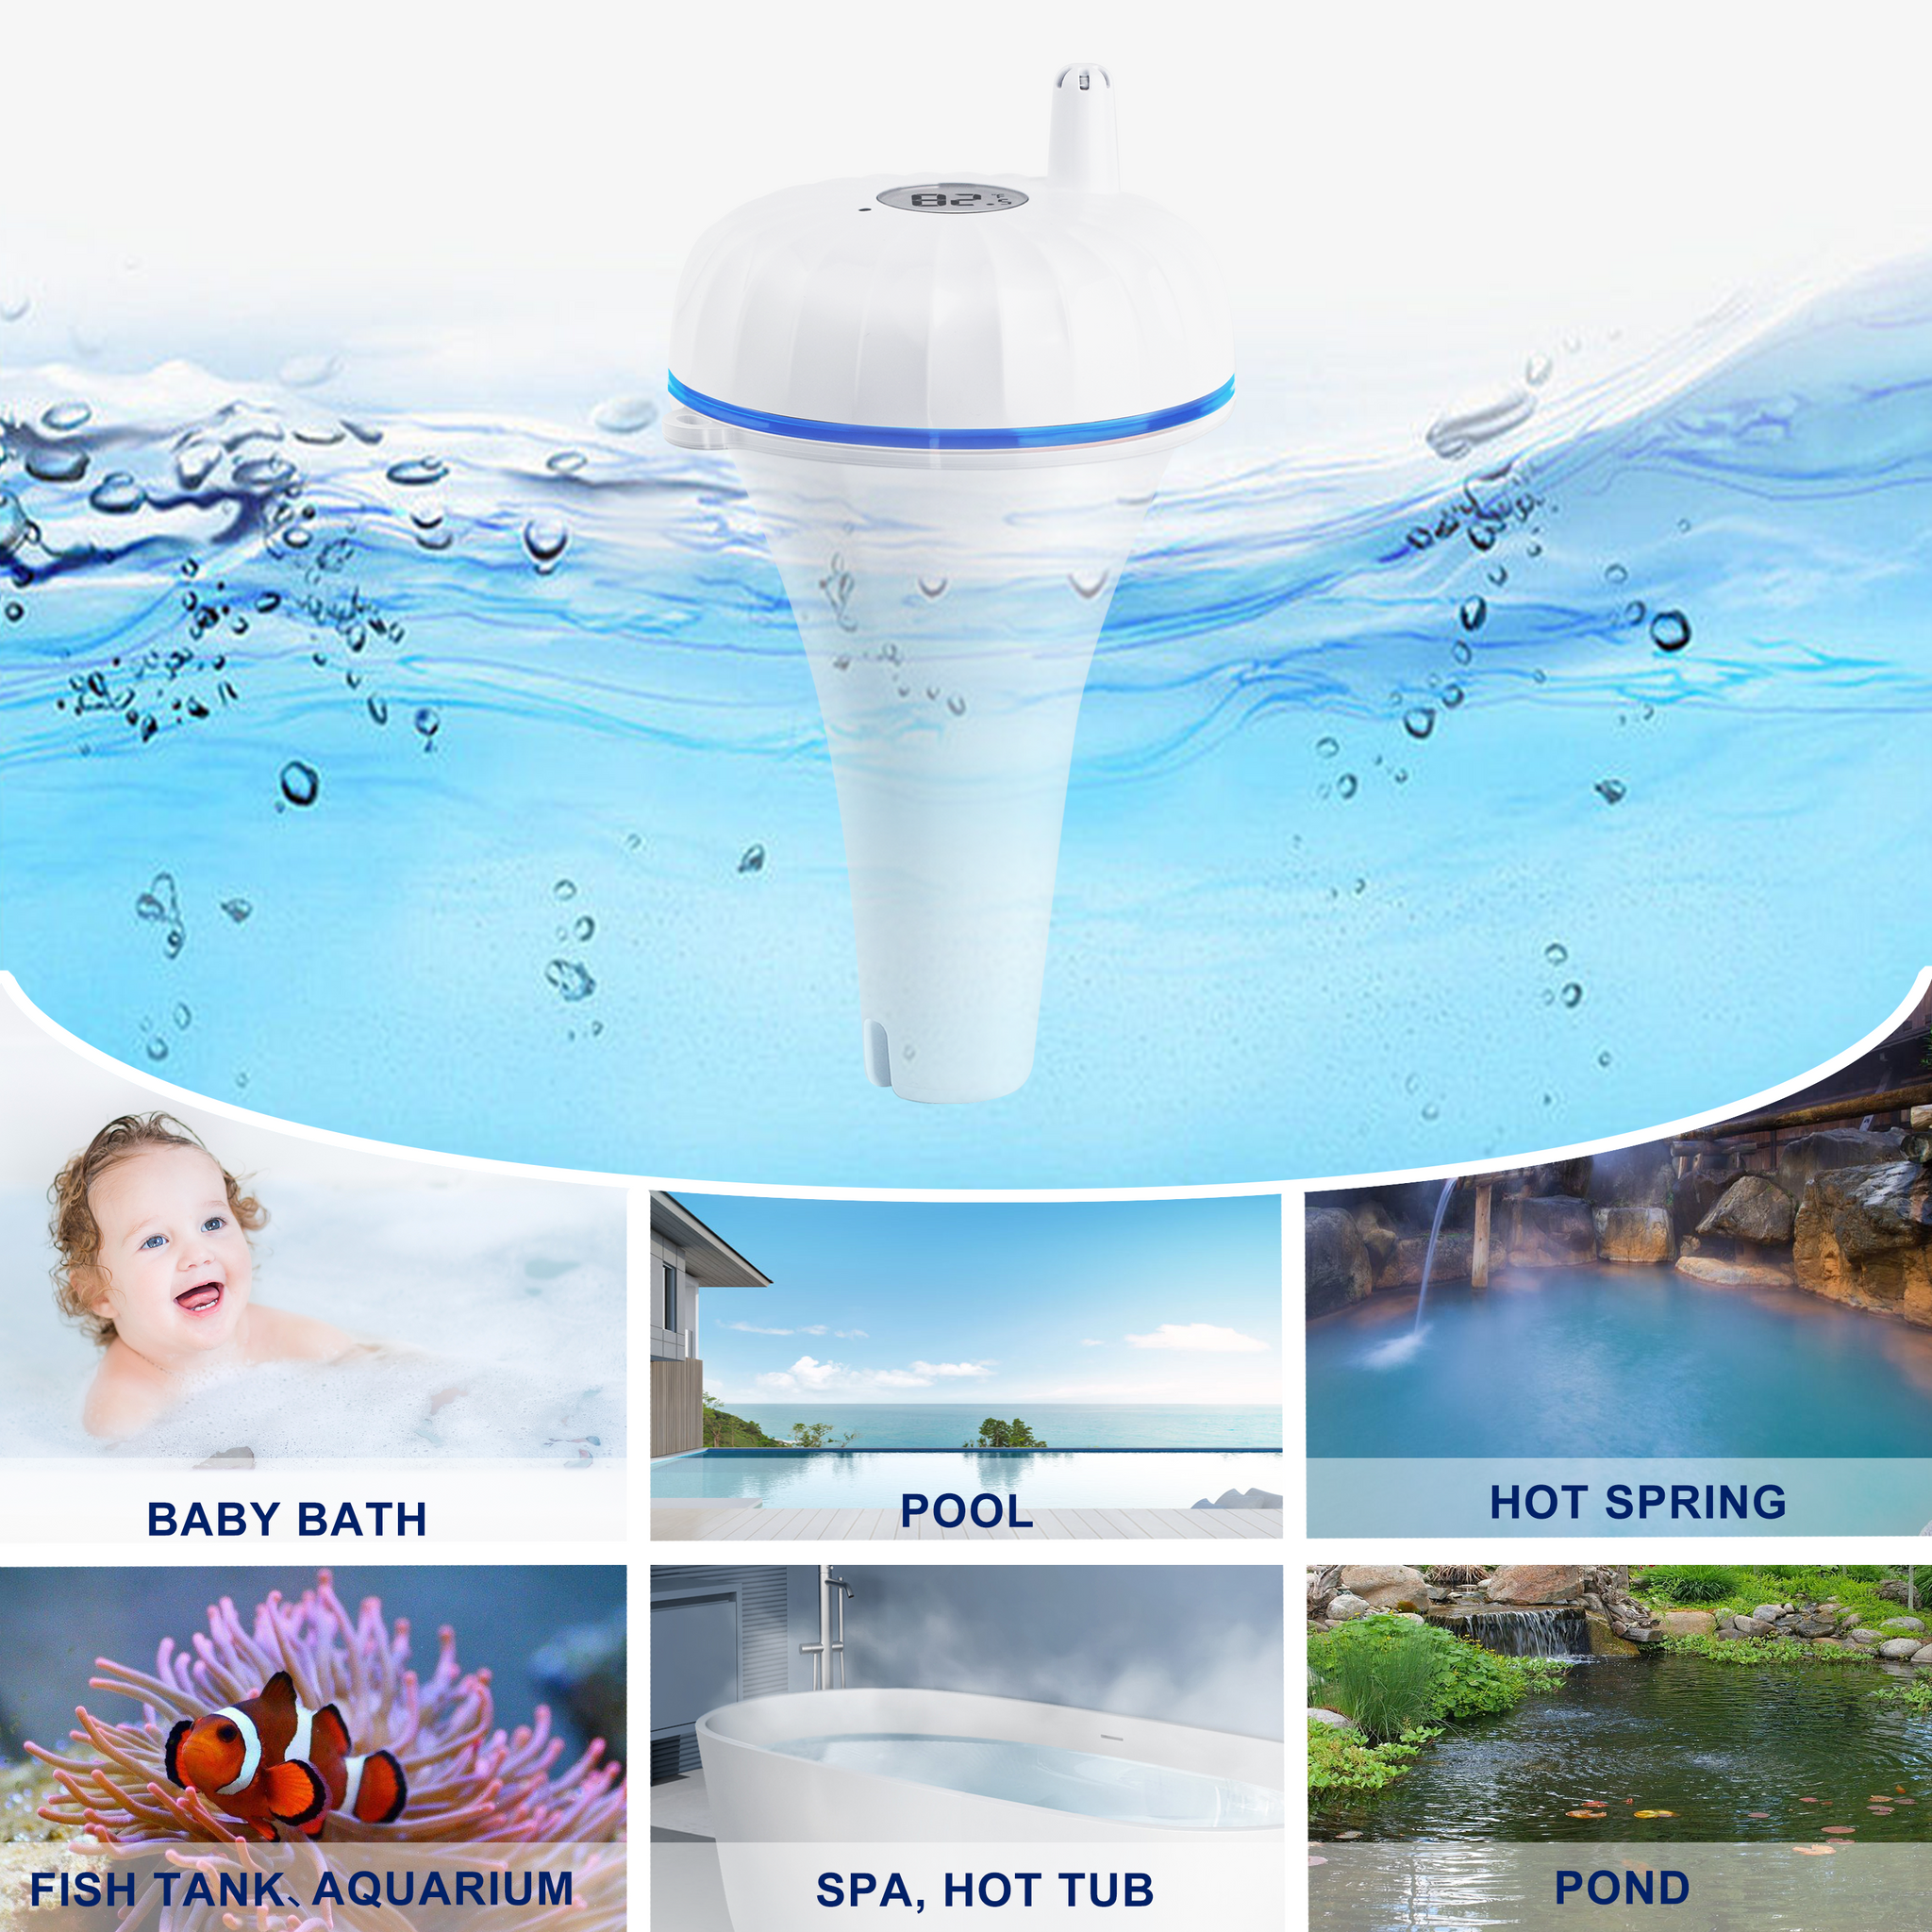 Swimming Pool Thermometer,Baby Float Water Temperature Pond Sauna